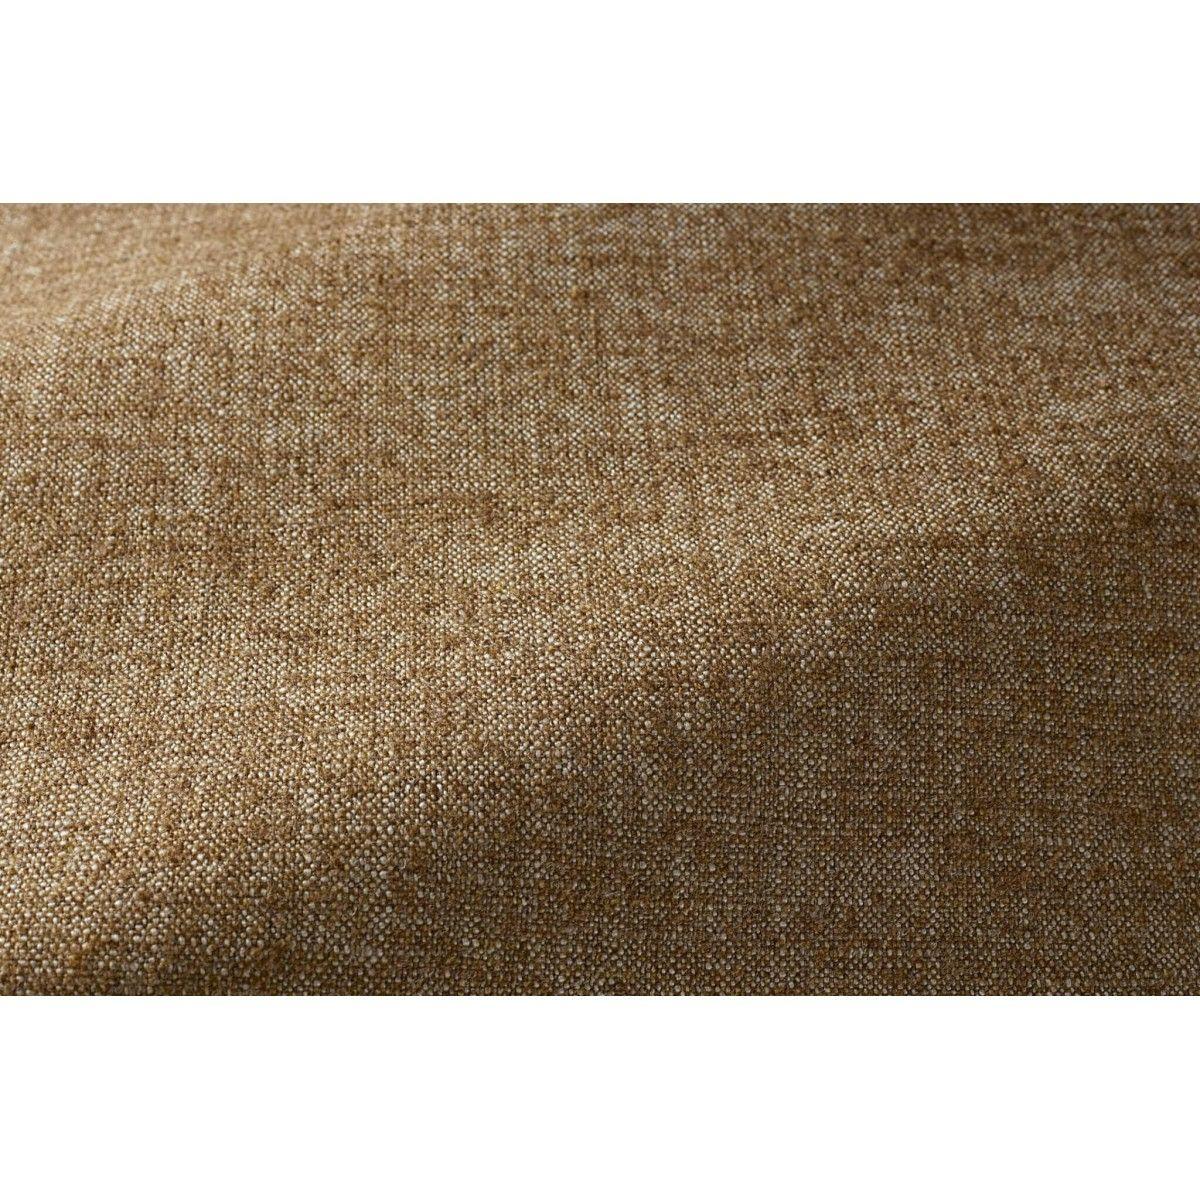 Popus Editions Giovanna 4 Seater Sofa in Ocher London Linen Fabric

Giovanna is a sofa with a strong profile. A sober, plush line, with this famous detail that changes everything, so as not to forget its strength of character and this charming